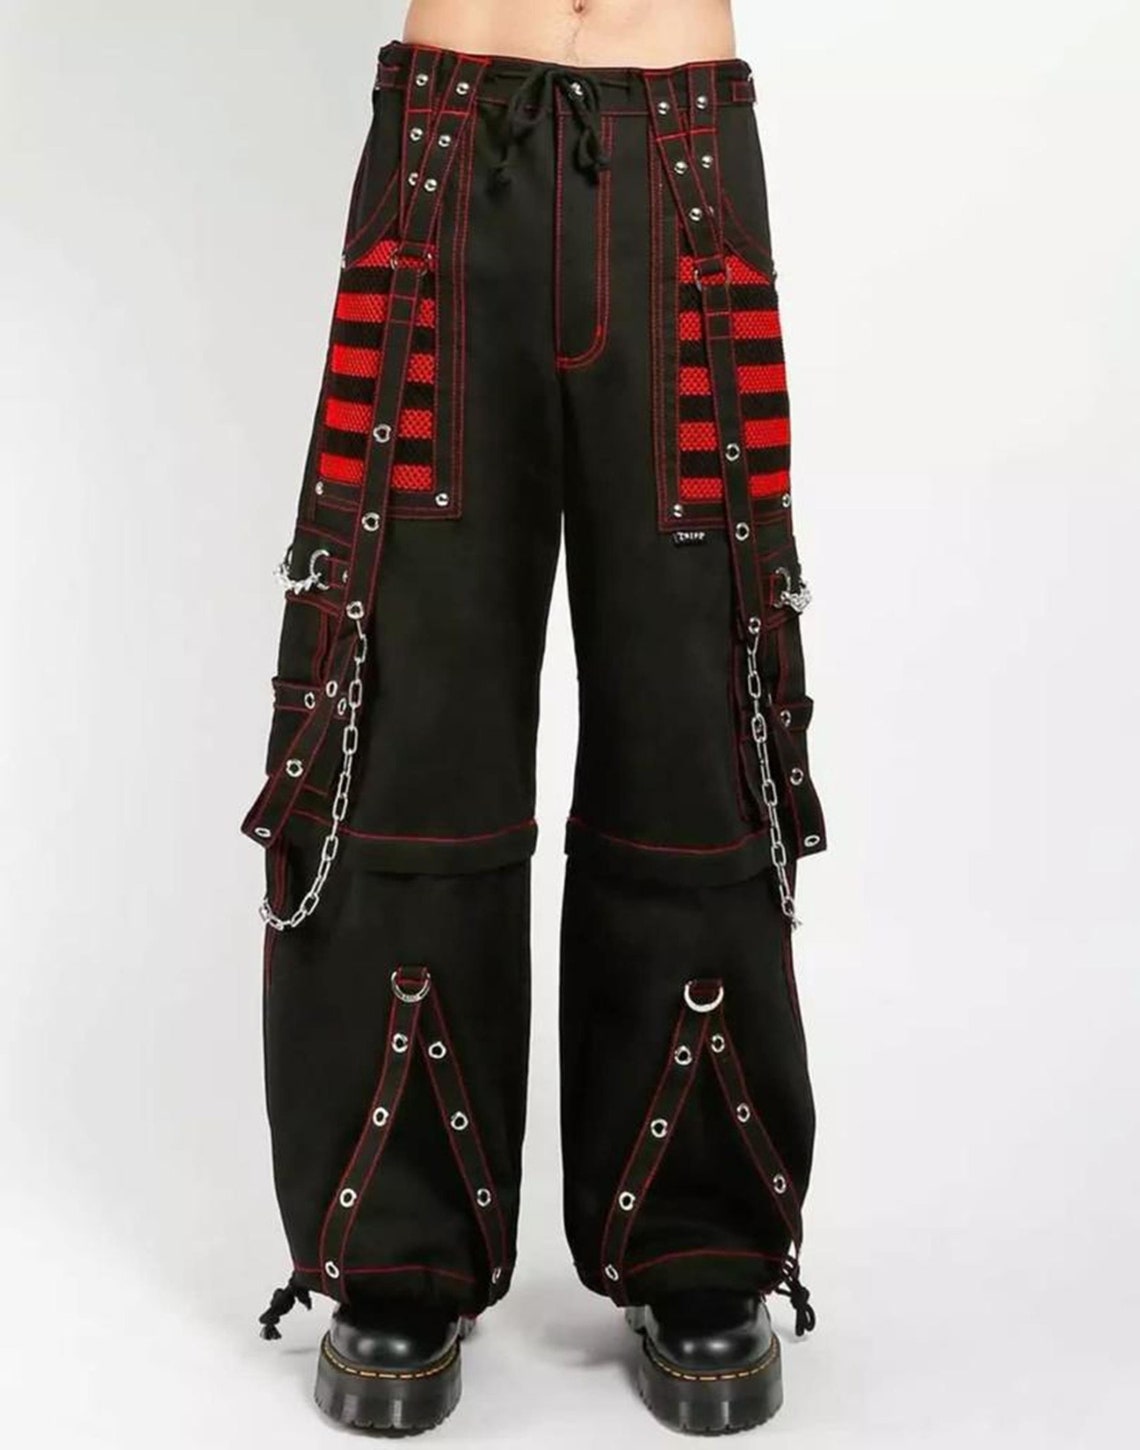 Men's Gothic Ripped Pants With Chains – Punk Design